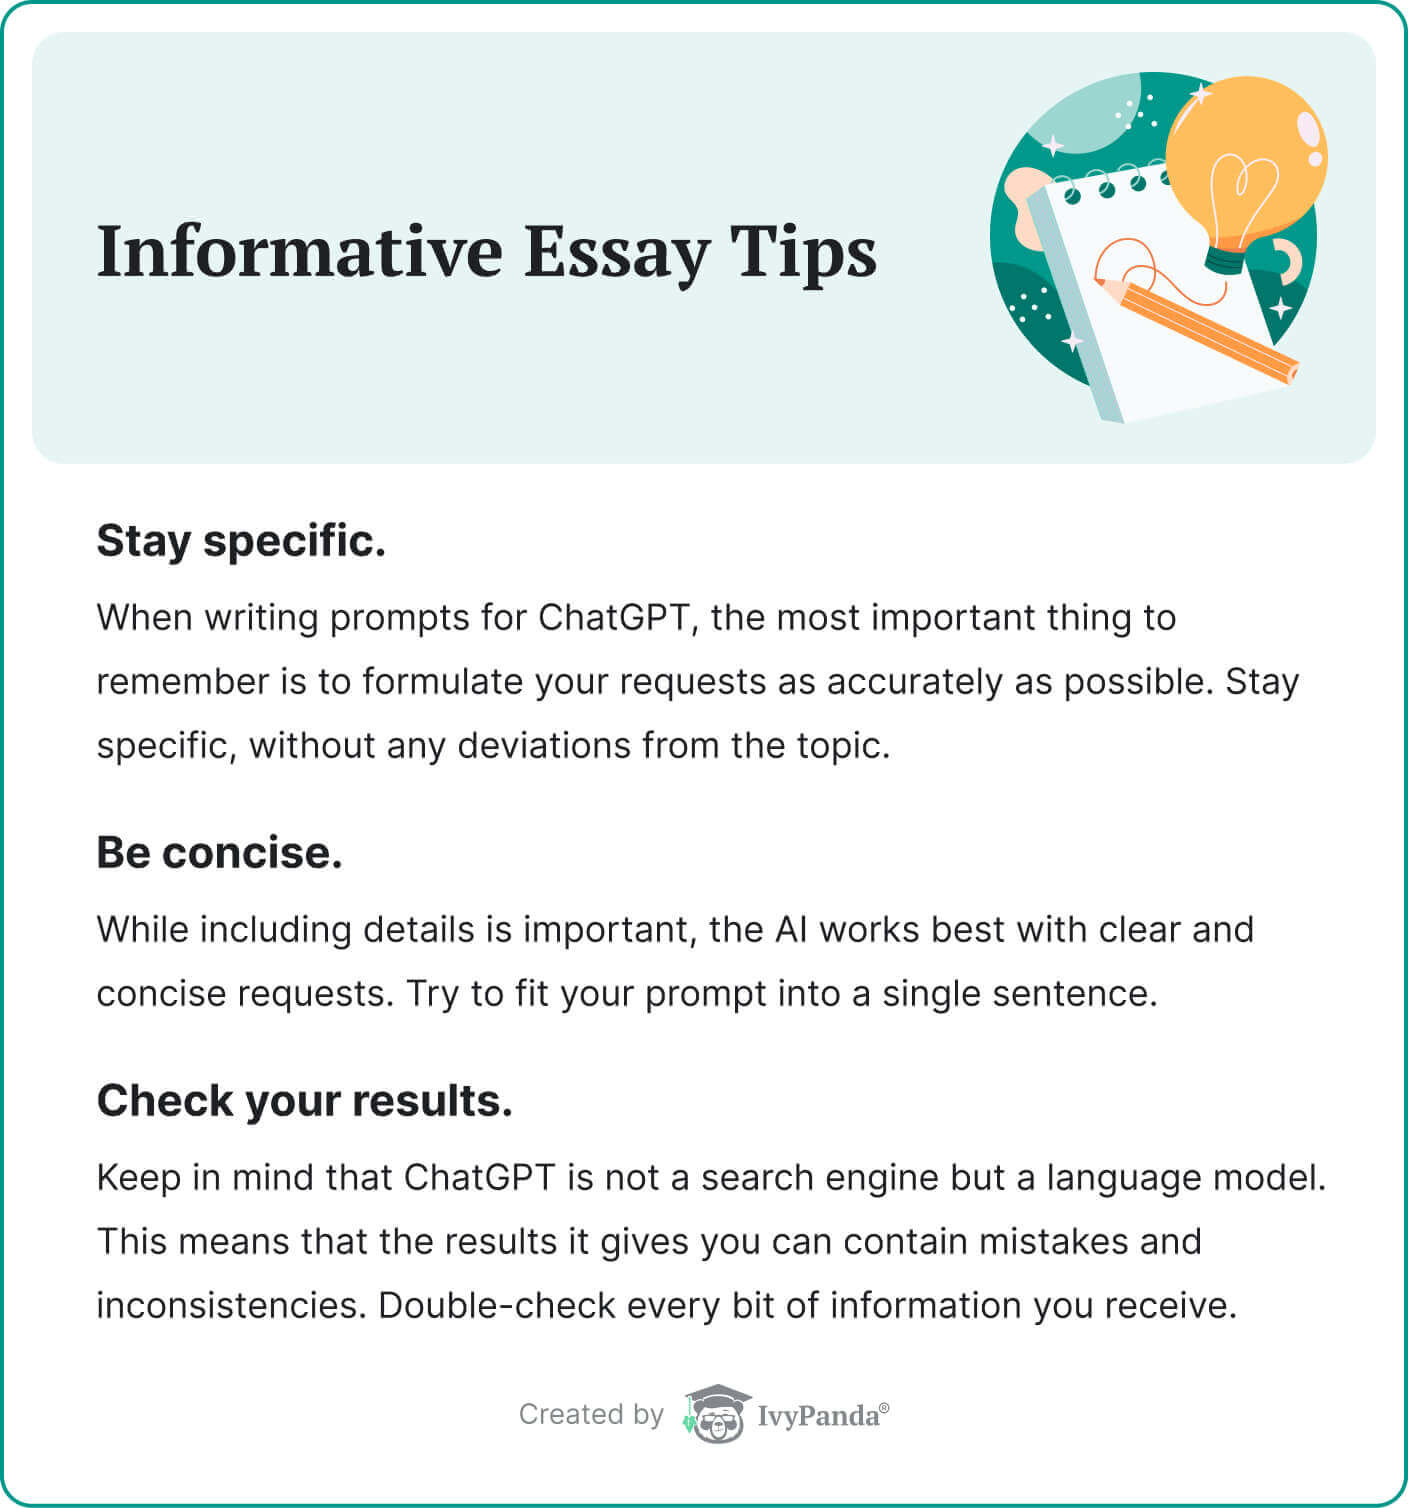 Tips for generating informative essays in ChatGPT.